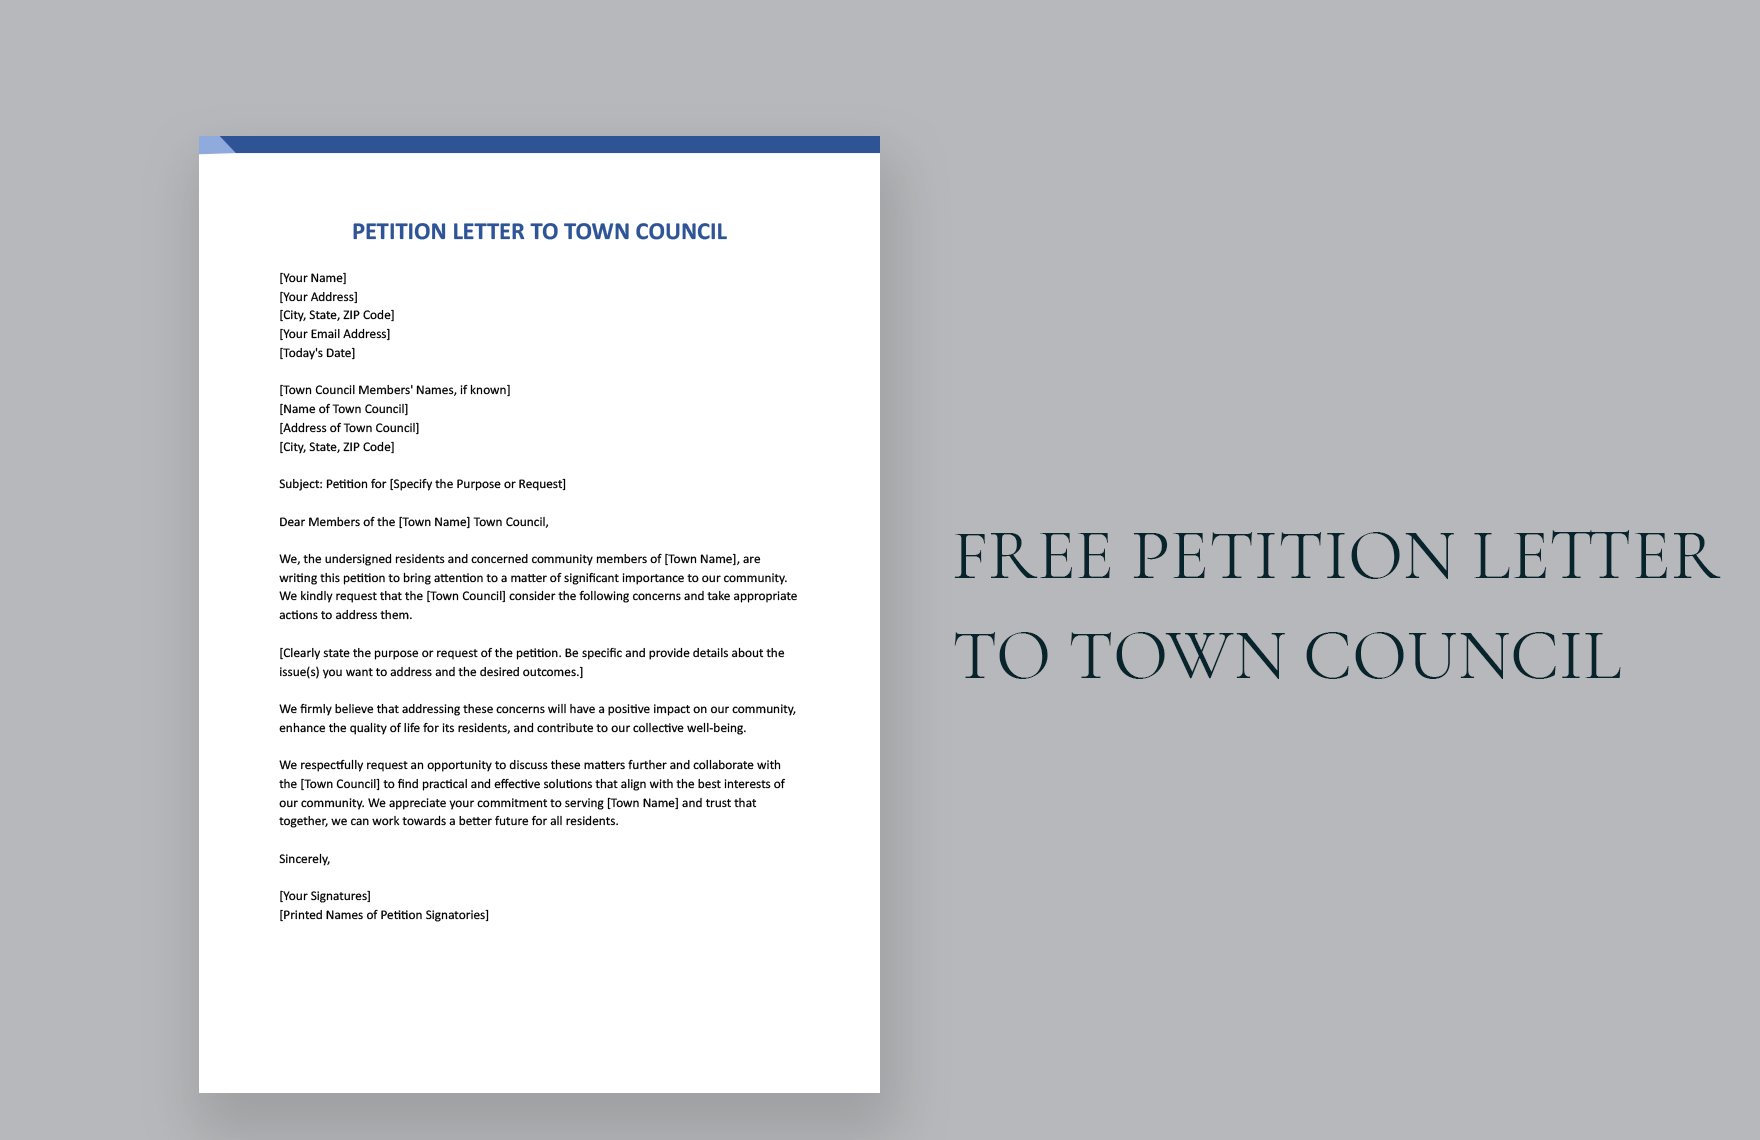 Petition Letter to Town Council